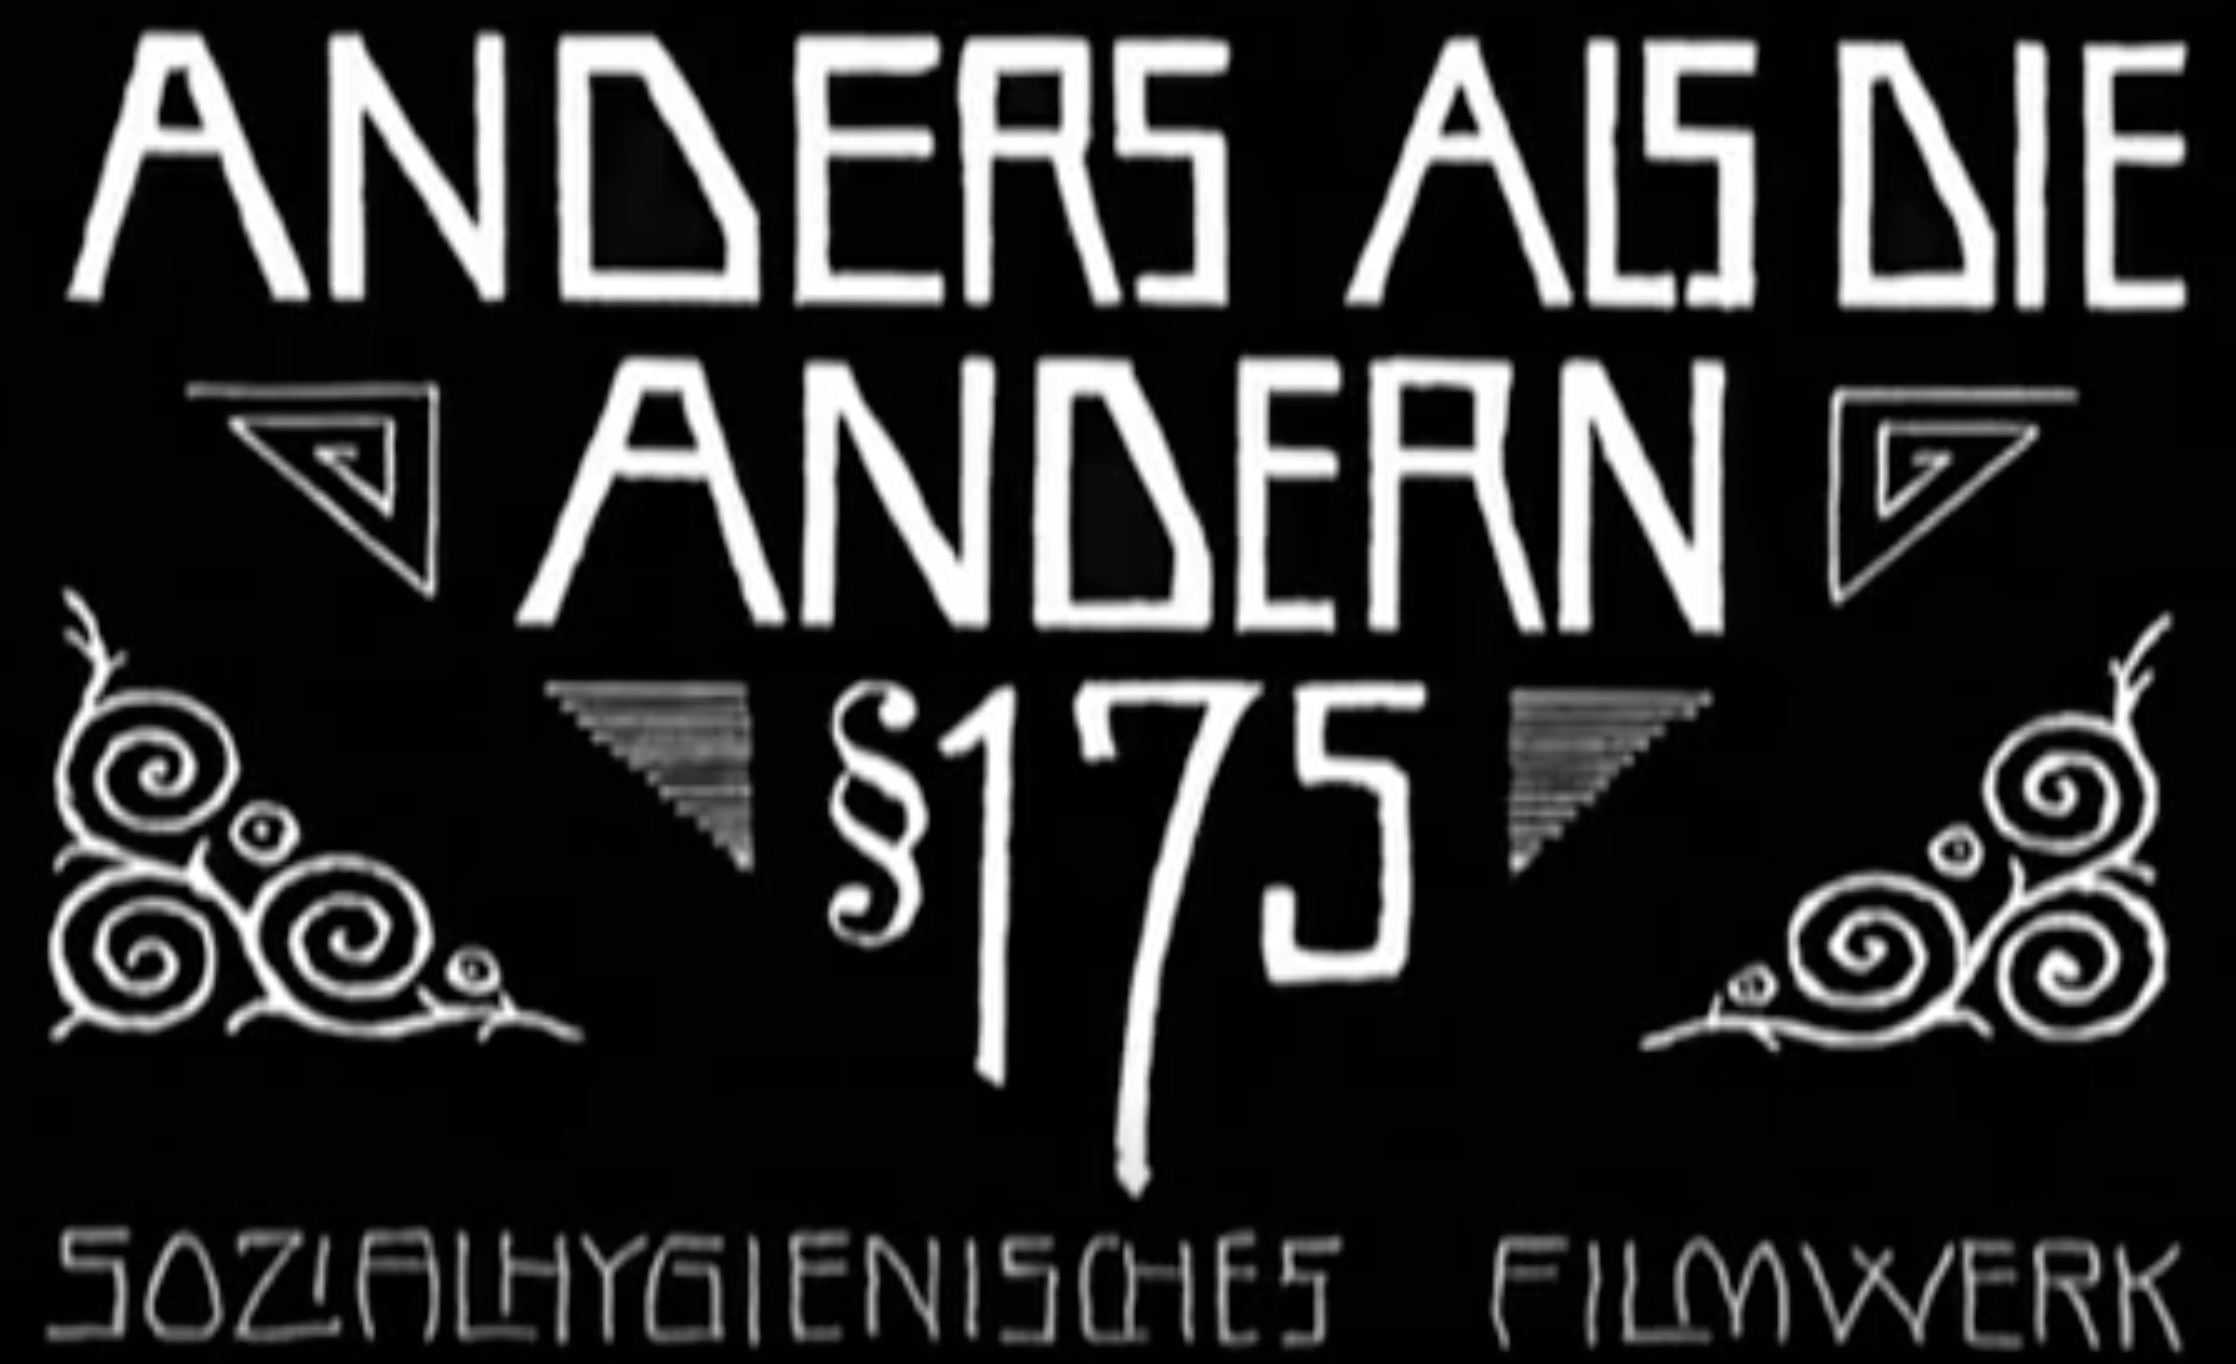 Anders als die Andern / Different from the Others